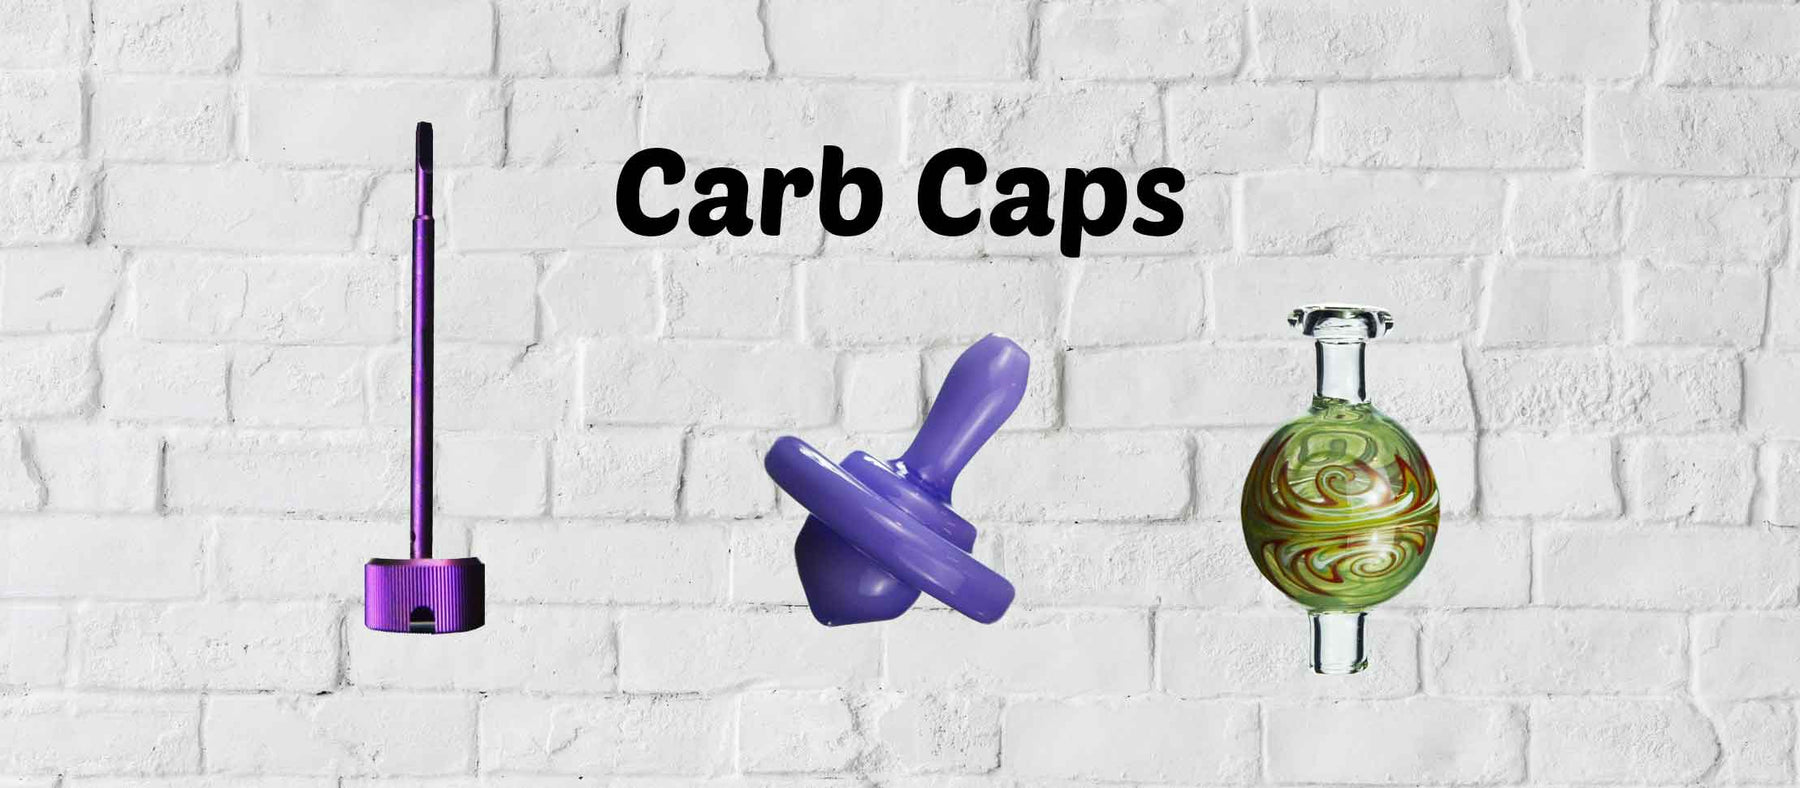 What is a Carb Cap?